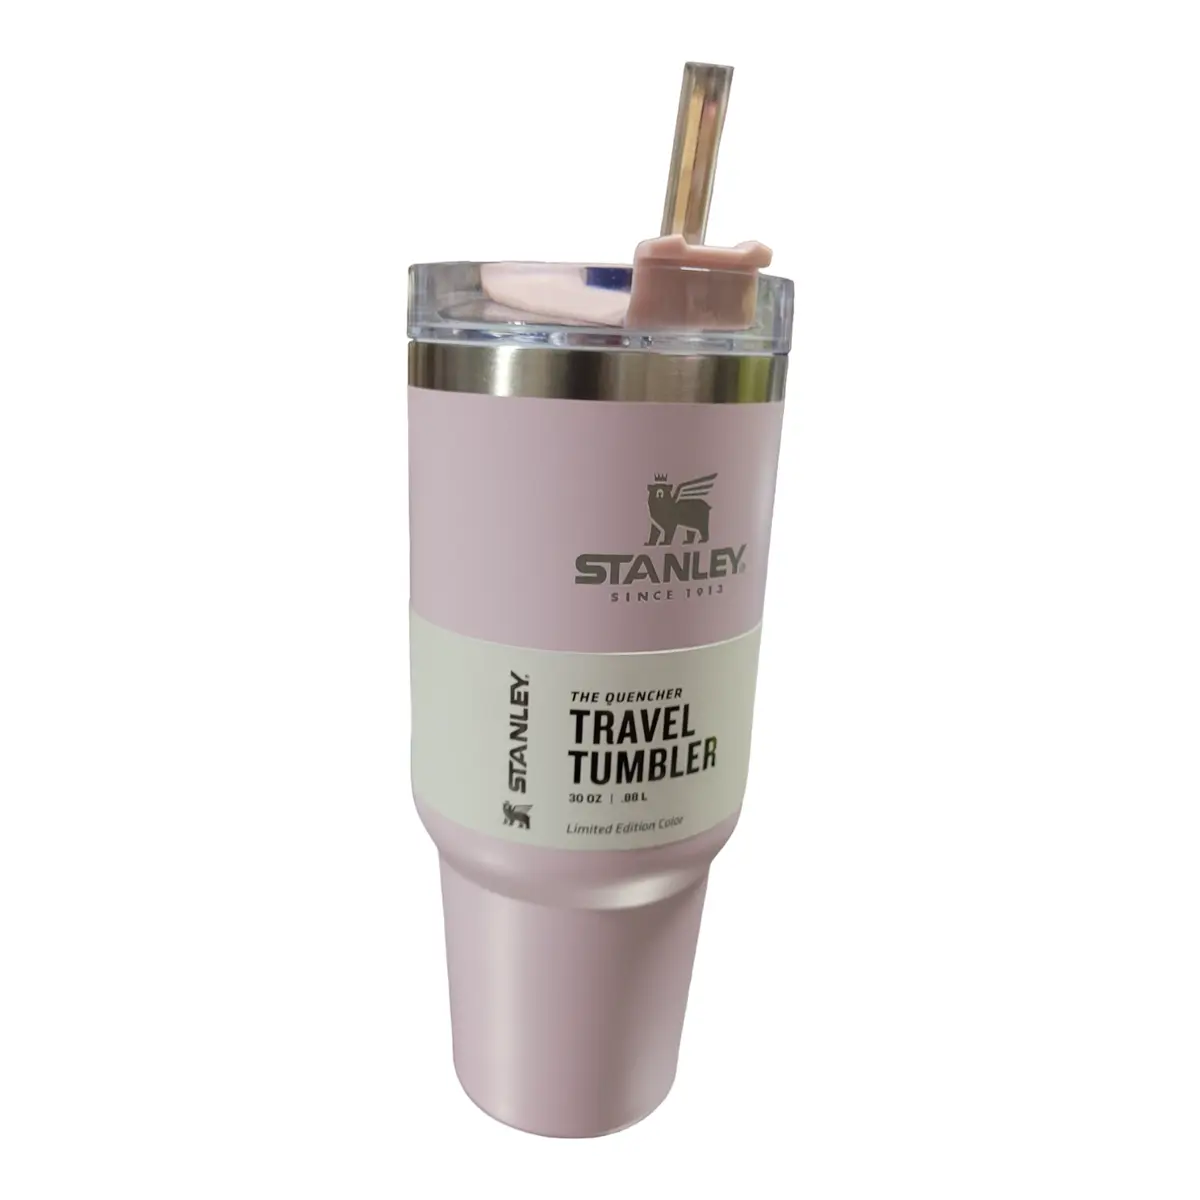 Stanley 30oz Quencher Travel Tumbler Flawless Pink Target Limited Ed Blem